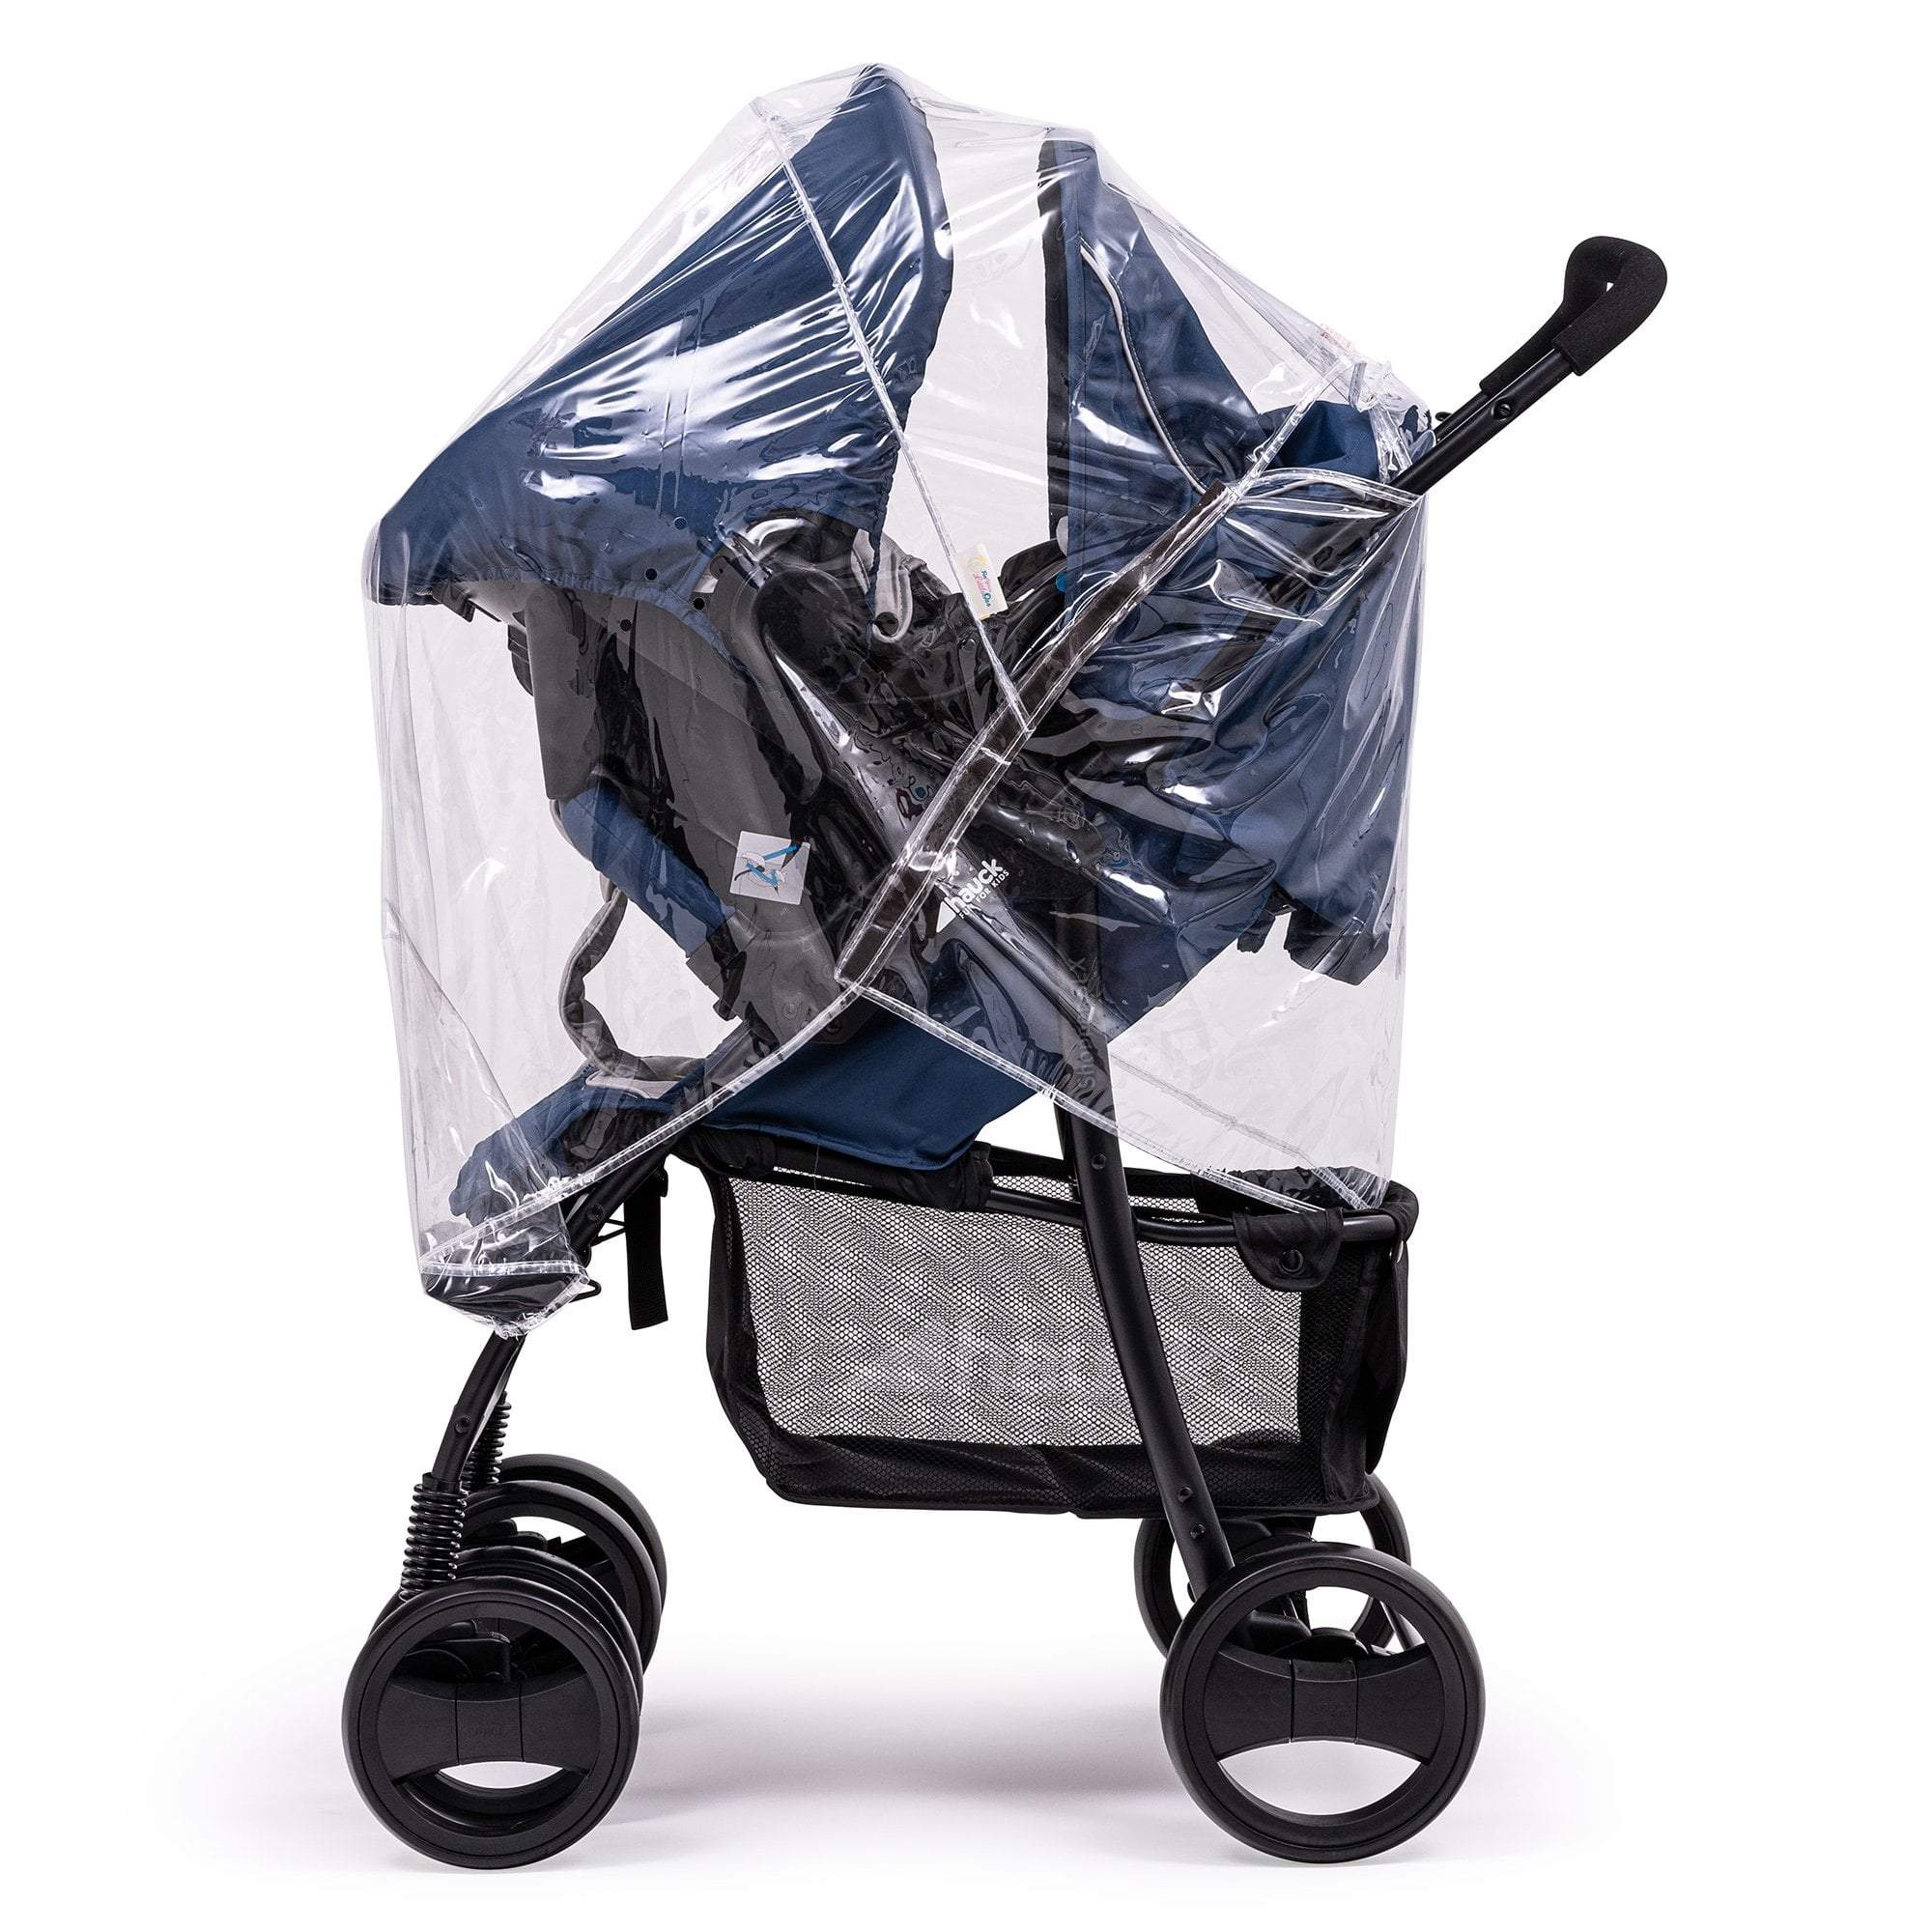 Travel System Raincover Compatible with XTS - Fits All Models - For Your Little One